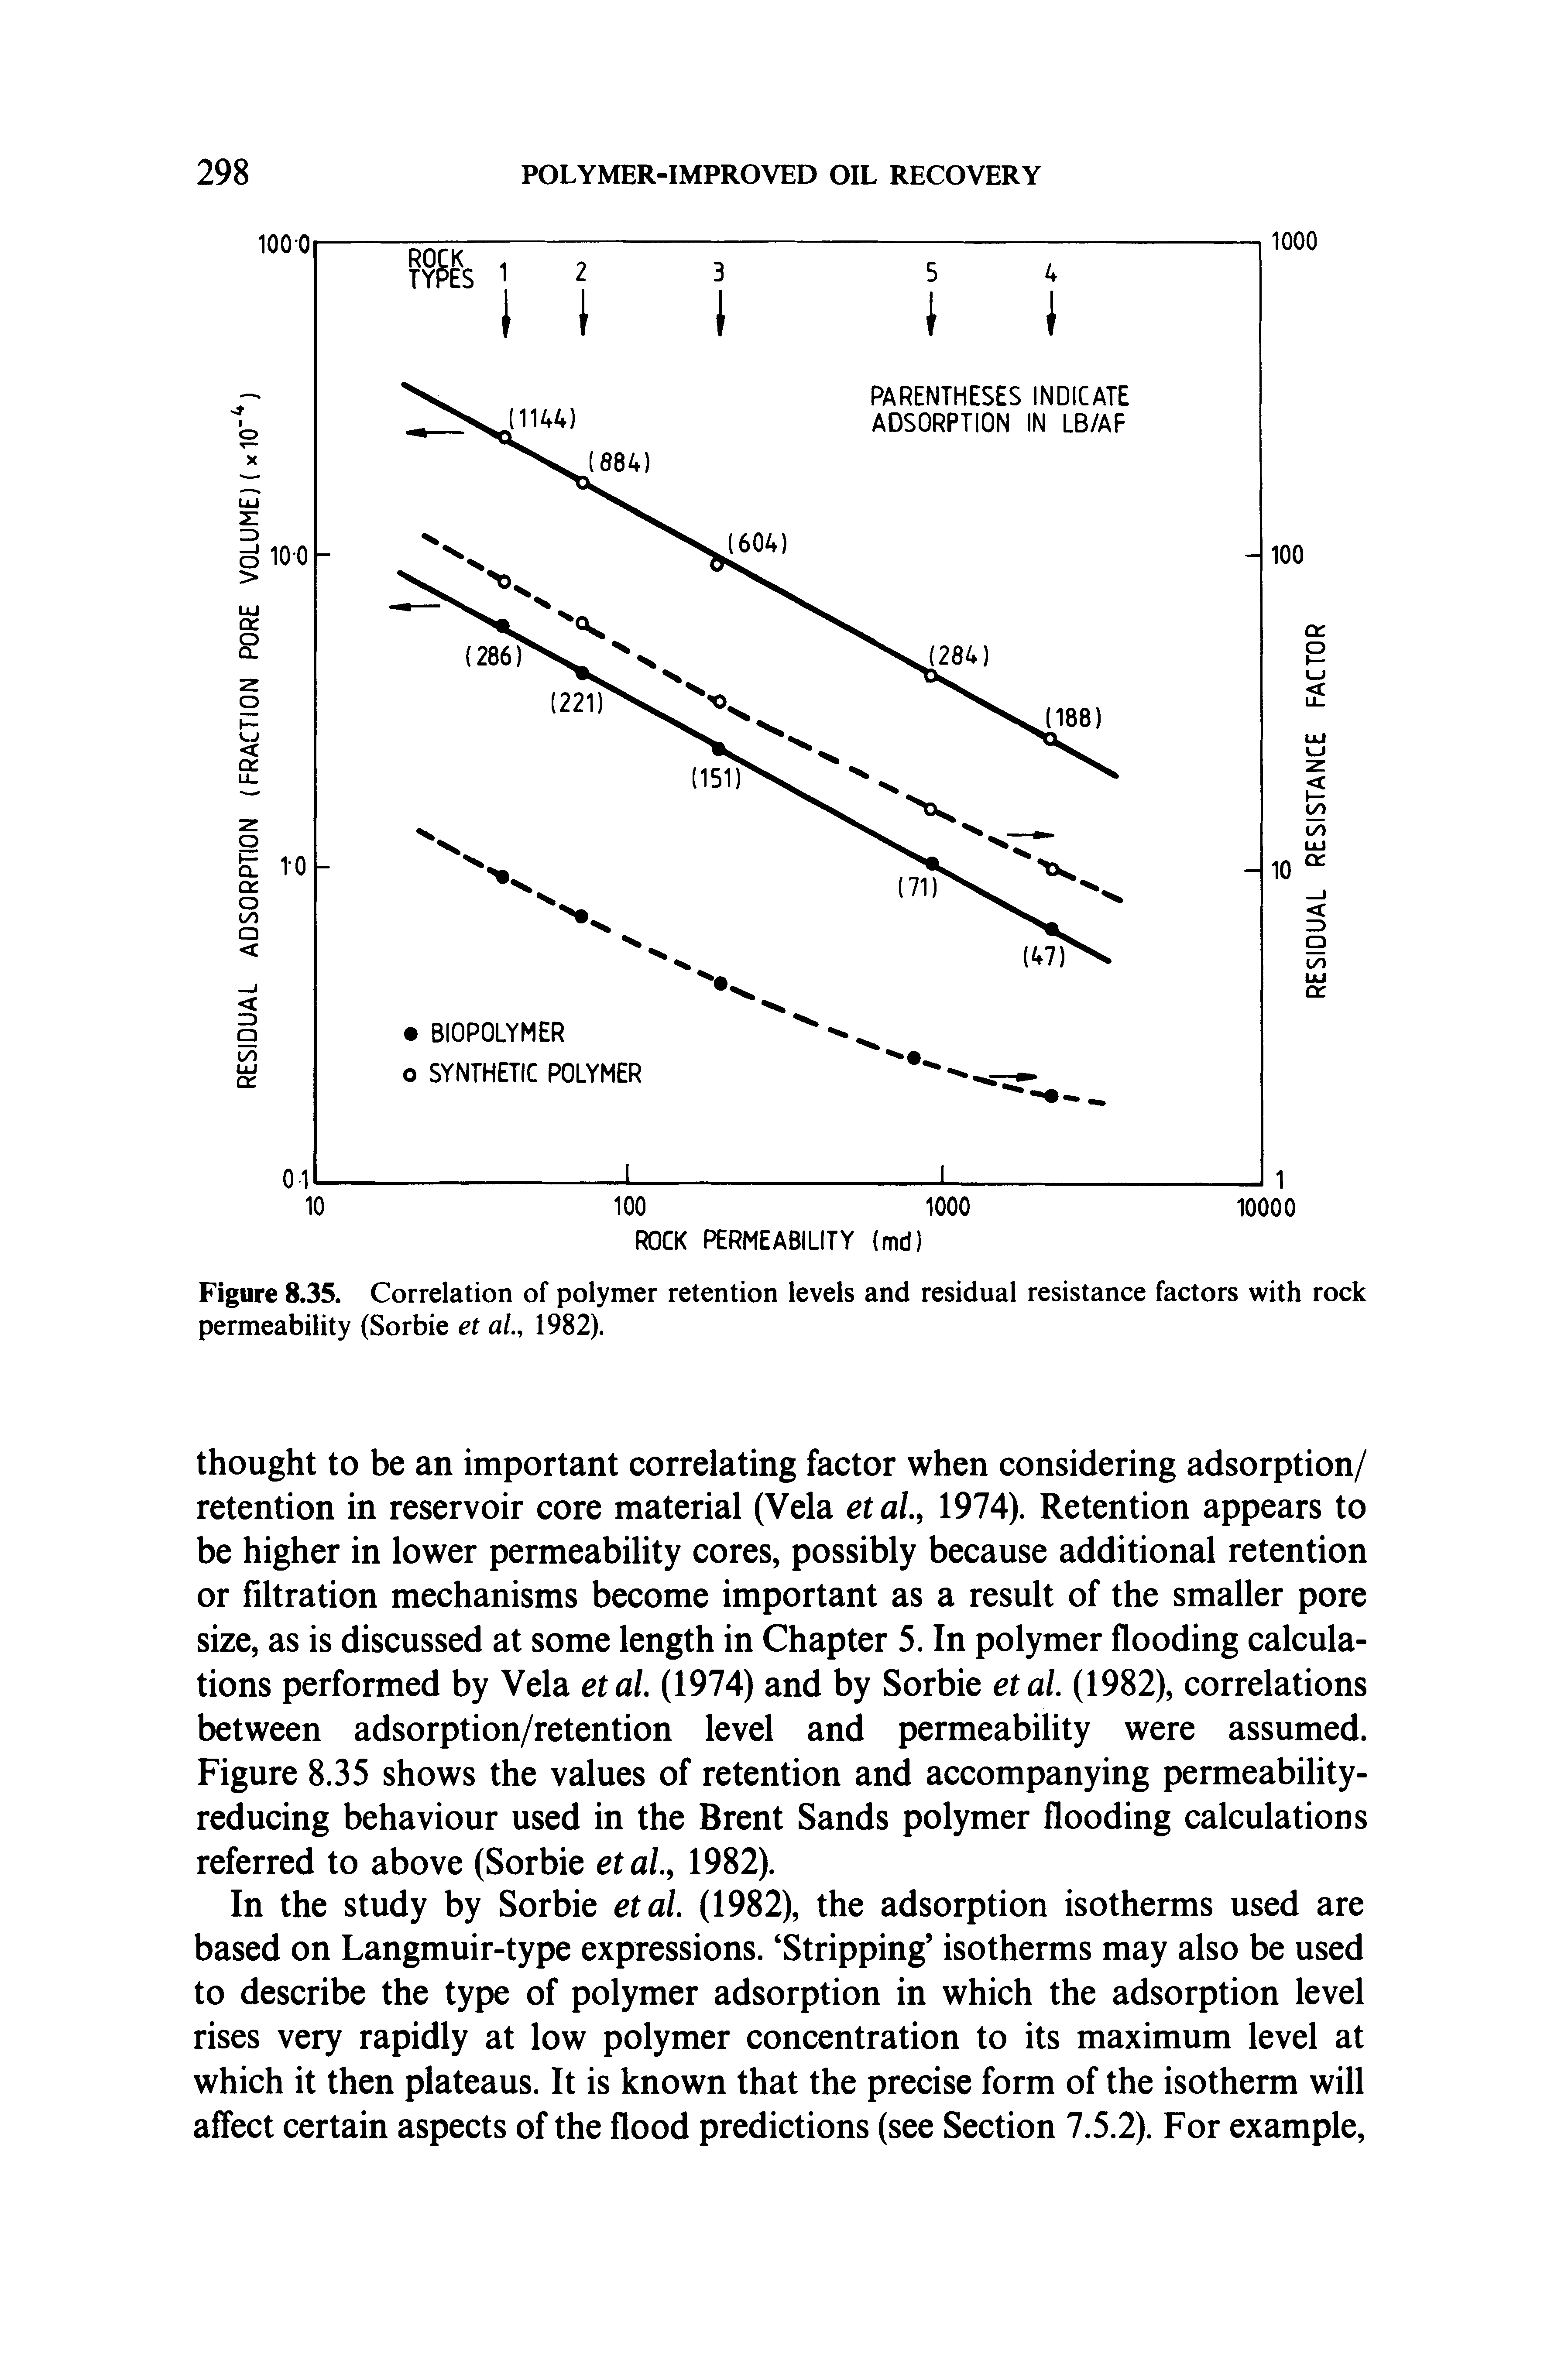 Figure 8.35. Correlation of polymer retention levels and residual resistance factors with rock permeability (Sorbie et al., 1982).